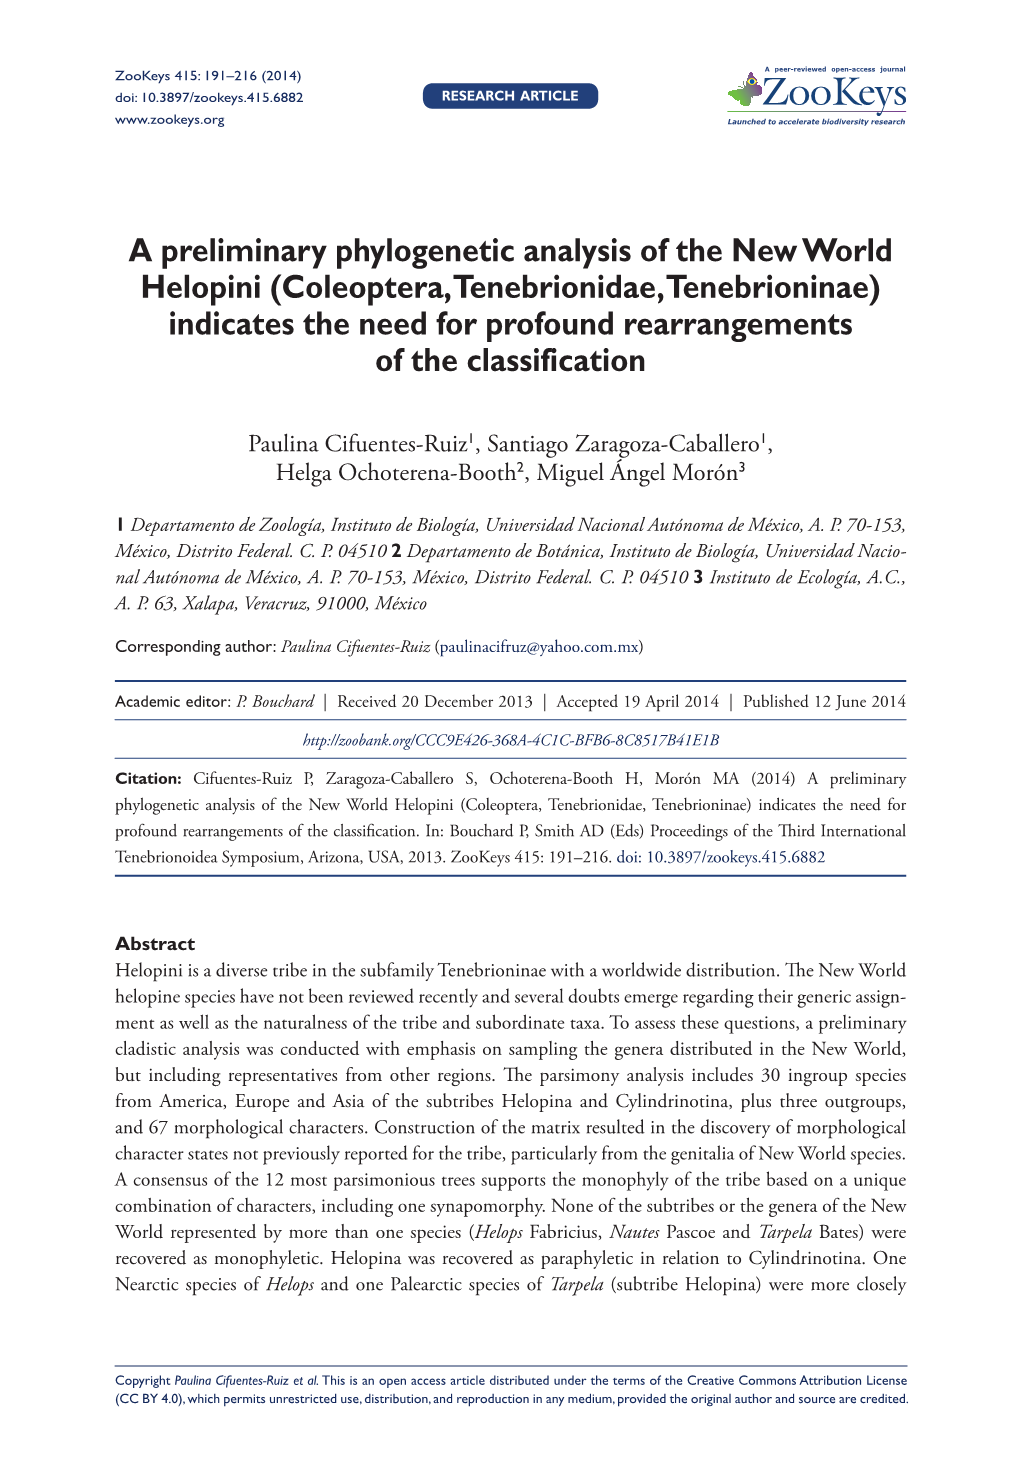 A Preliminary Phylogenetic Analysis of the New World Helopini